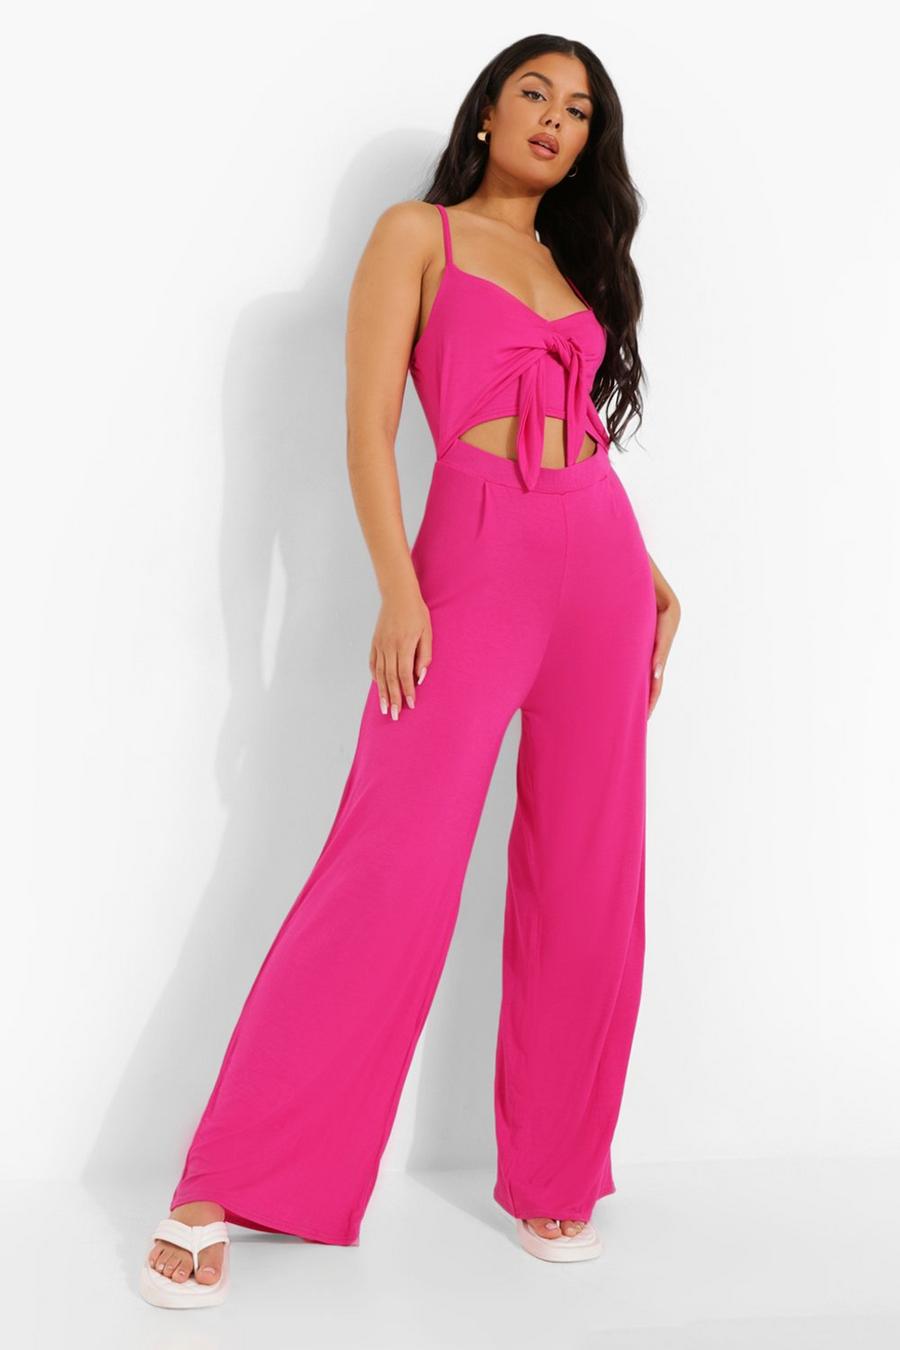 Hot pink Strappy Tie Bust Cut Out Wide Leg Jumpsuit